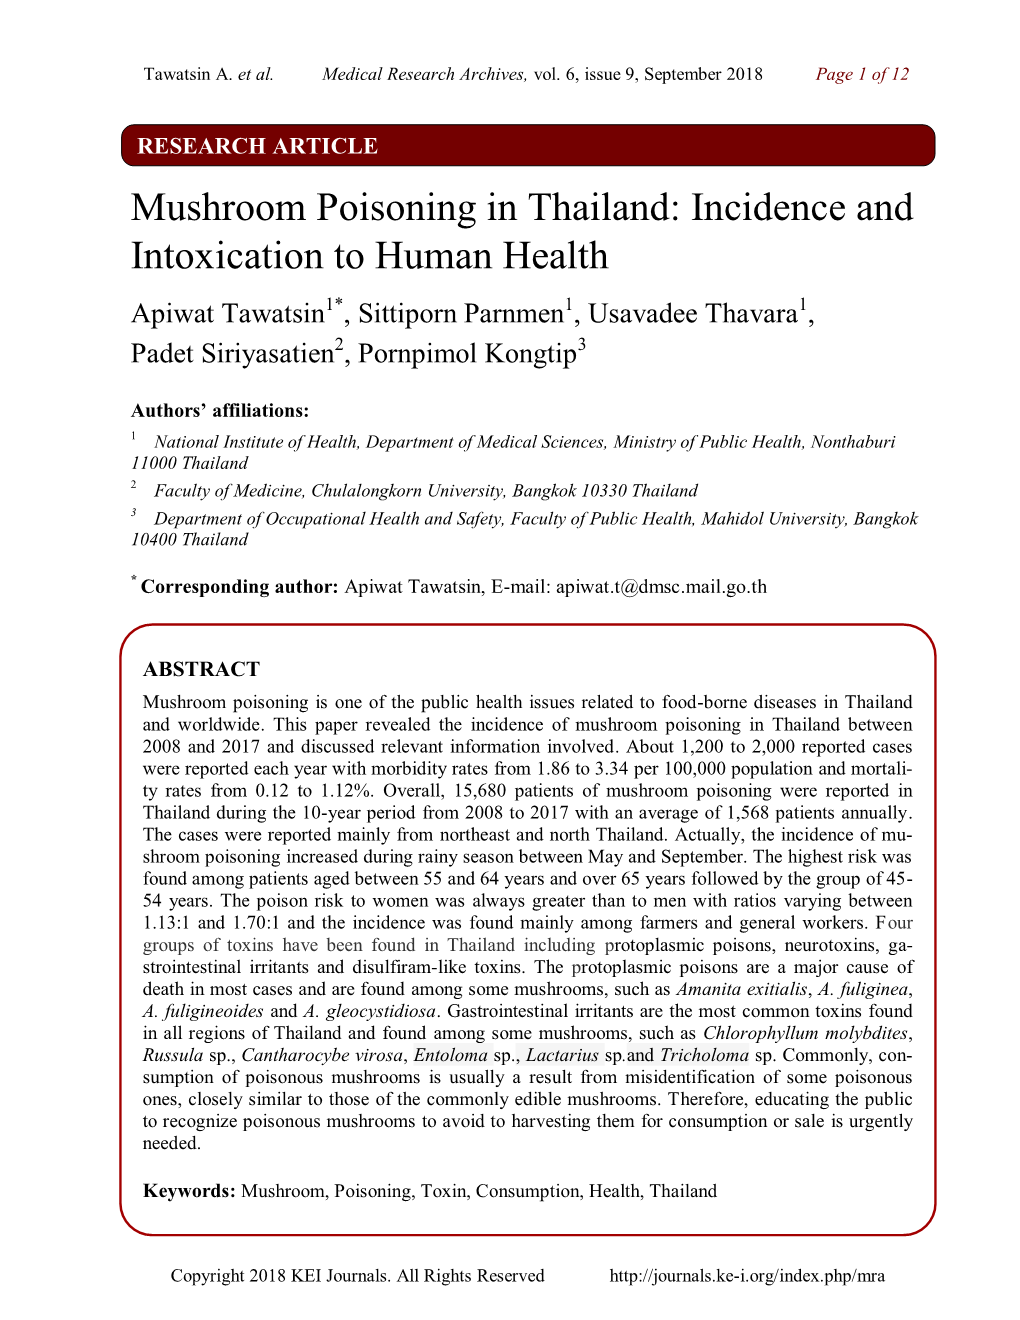 Mushroom Poisoning in Thailand: Incidence and Intoxication To